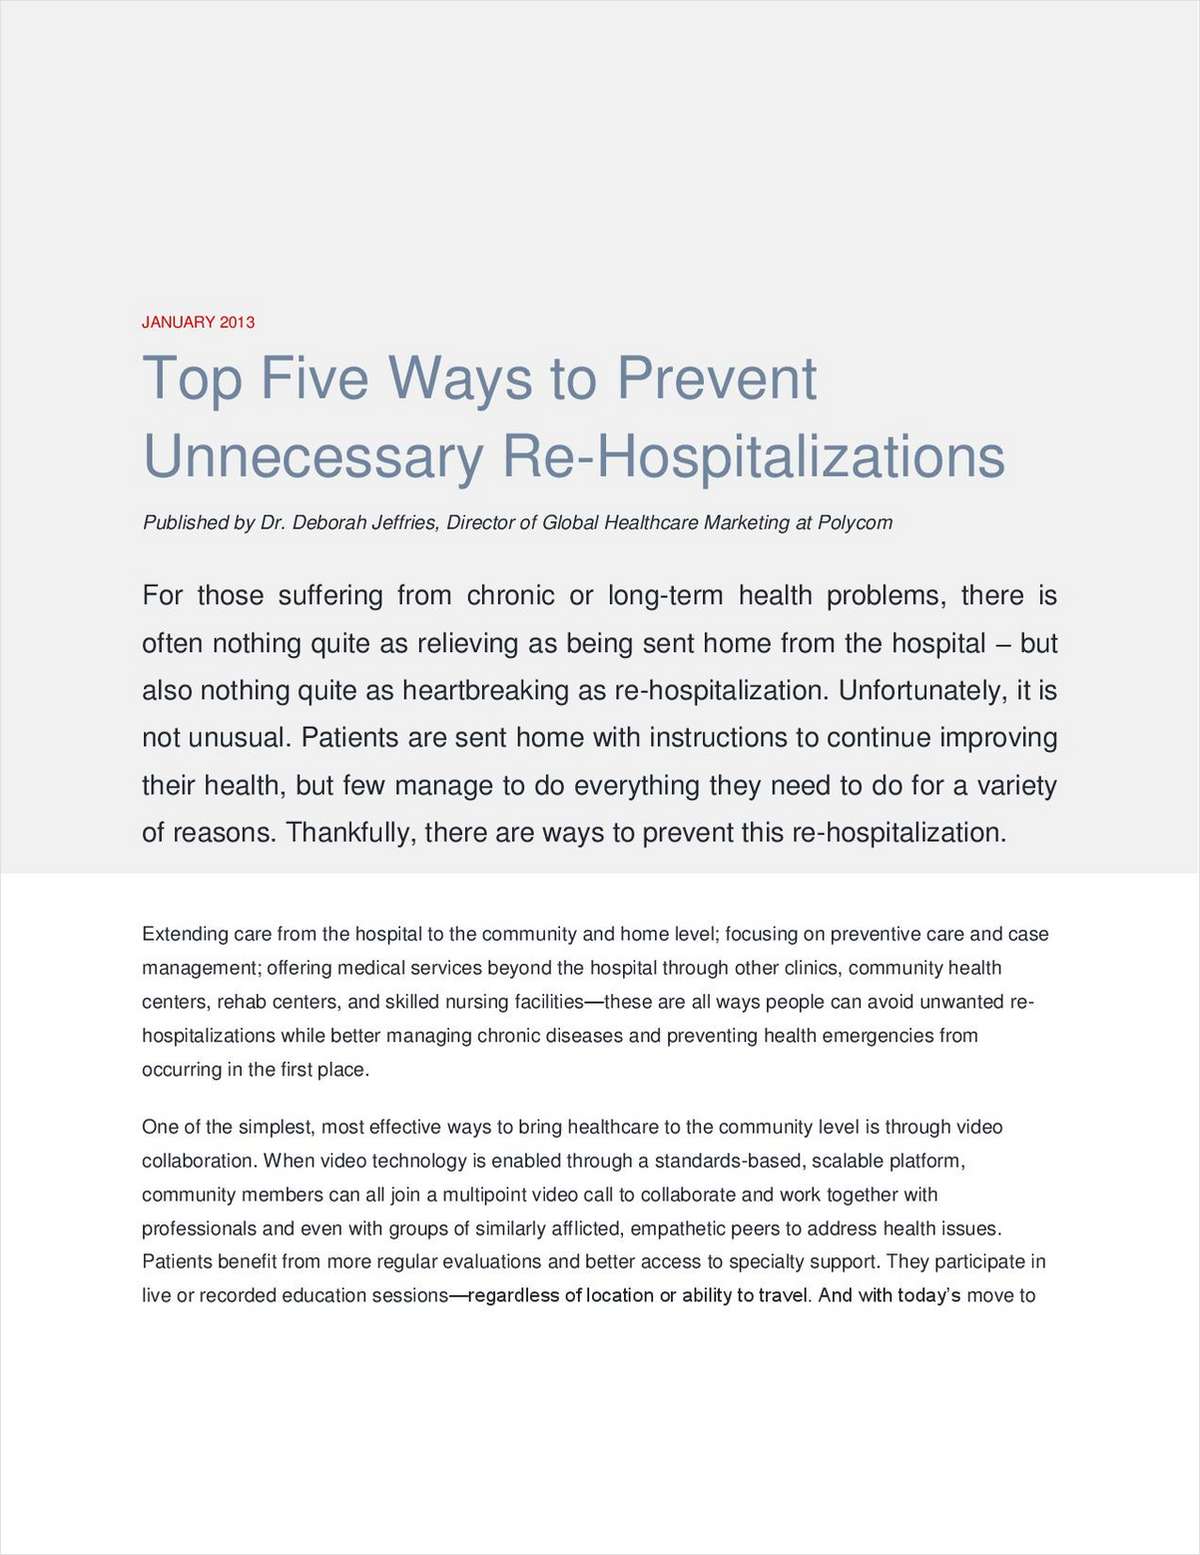 Top Five Ways to Prevent Unnecessary Re-Hospitalizations